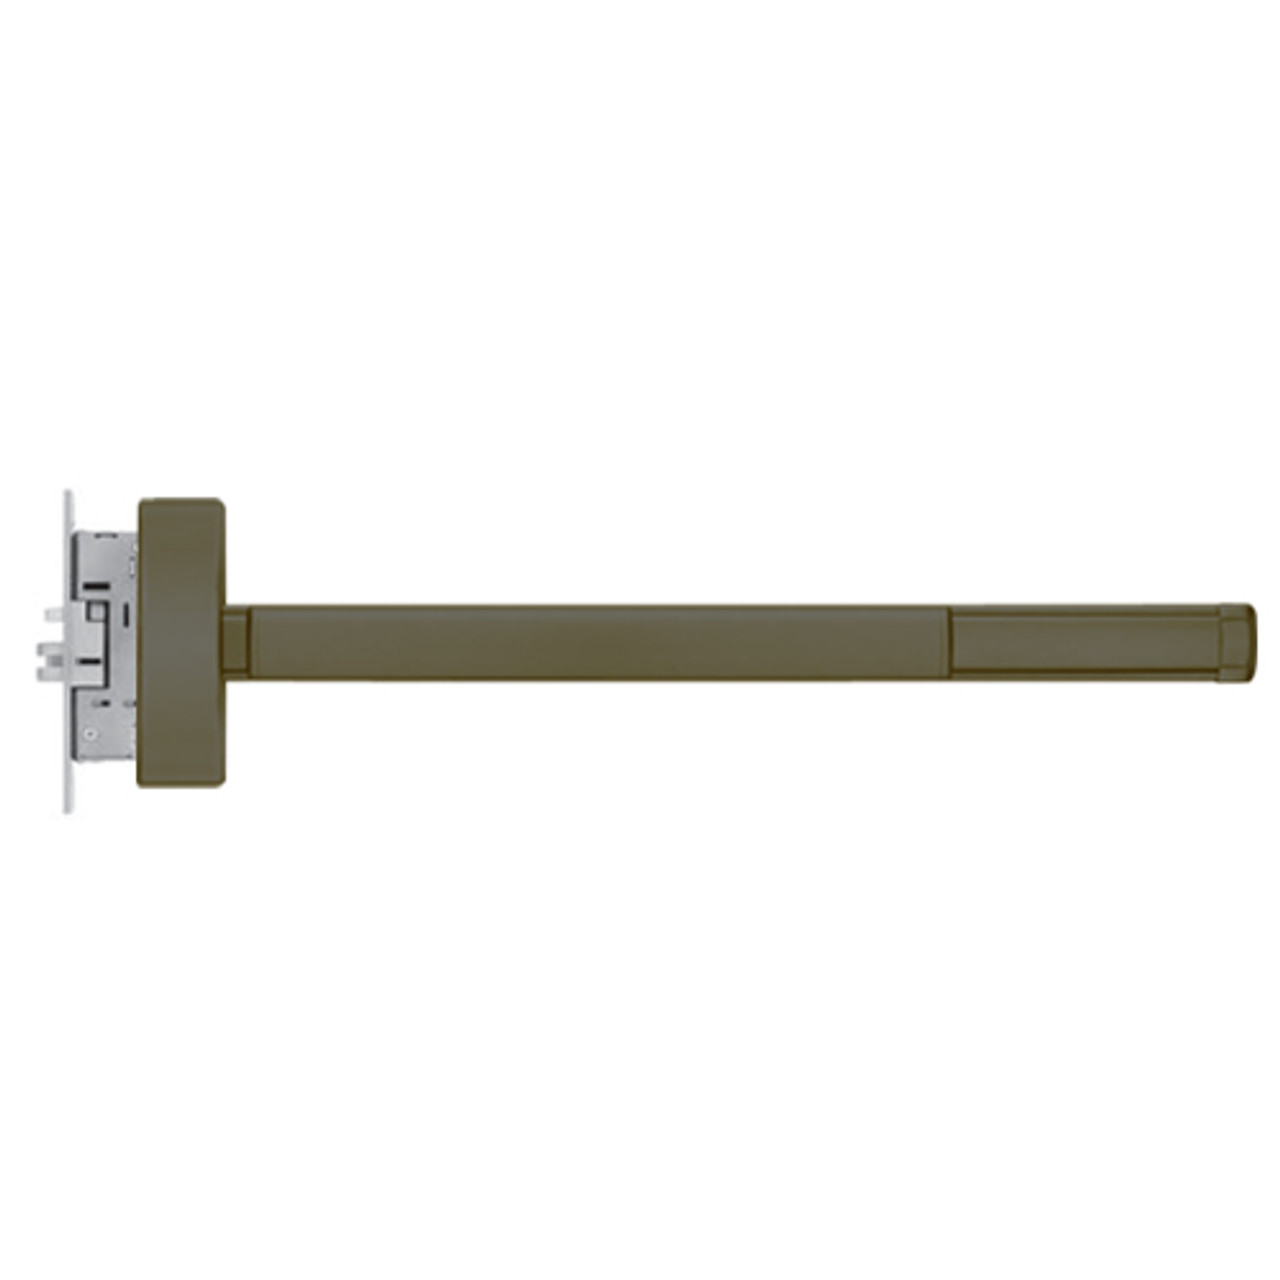 DE2305-RHR-613-36 PHI 2300 Series Apex Mortise Exit Device with Delayed Egress Prepped for Key Controls Thumb Piece in Oil Rubbed Bronze Finish